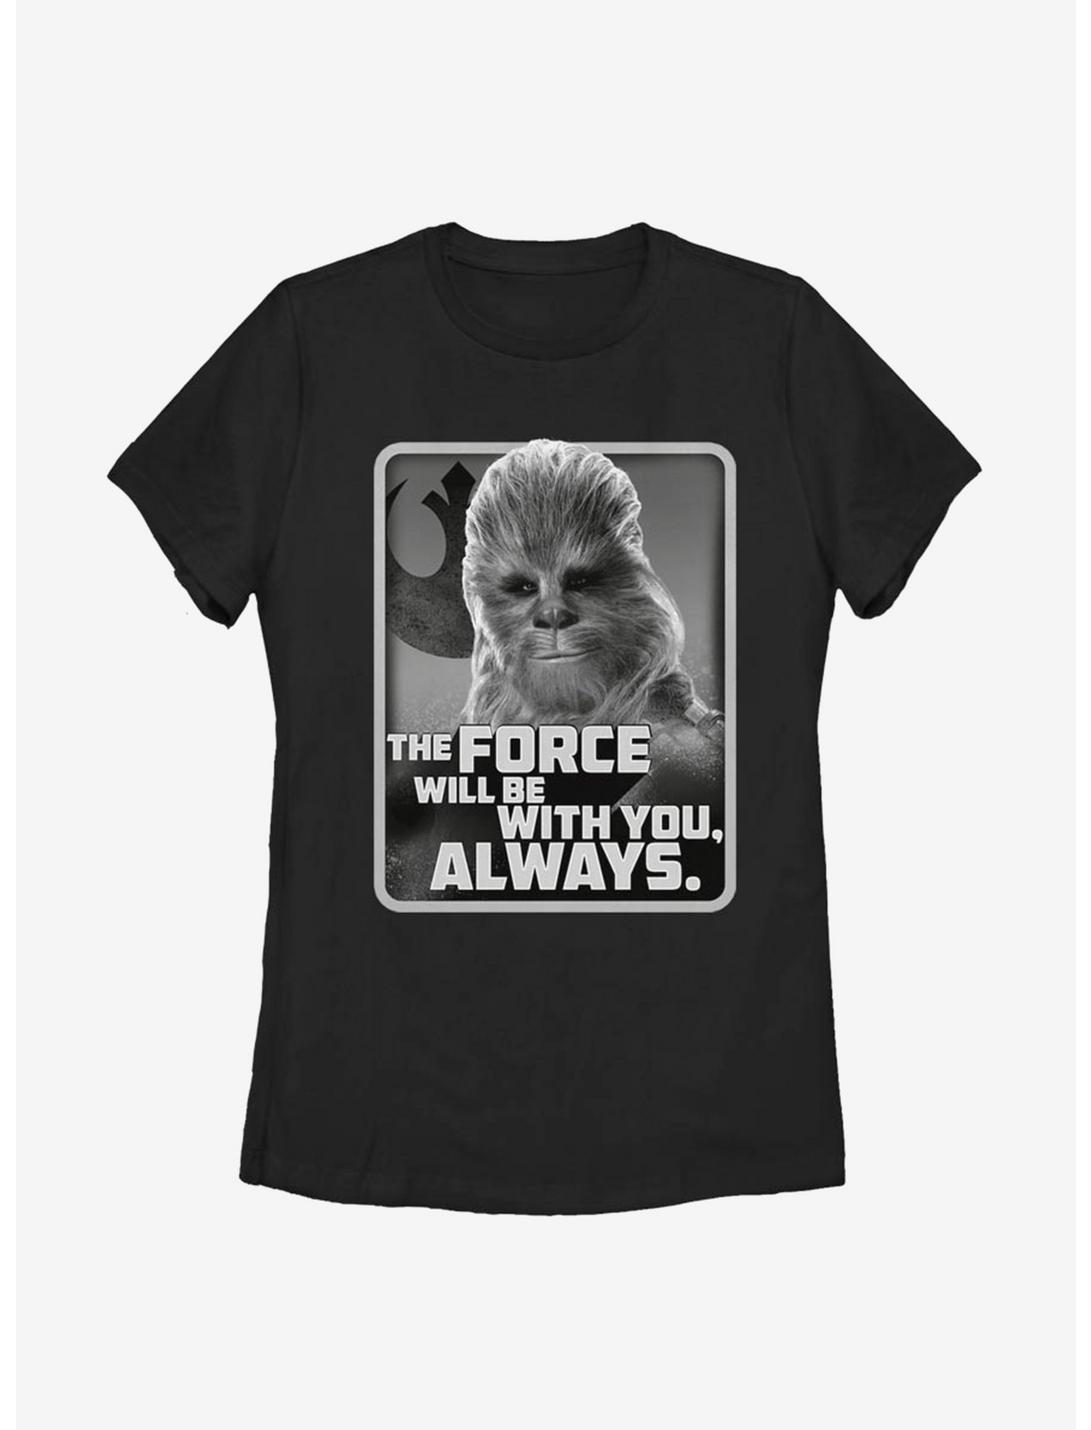 Star Wars Episode IX The Rise Of Skywalker With You Chewie Womens T-Shirt, BLACK, hi-res